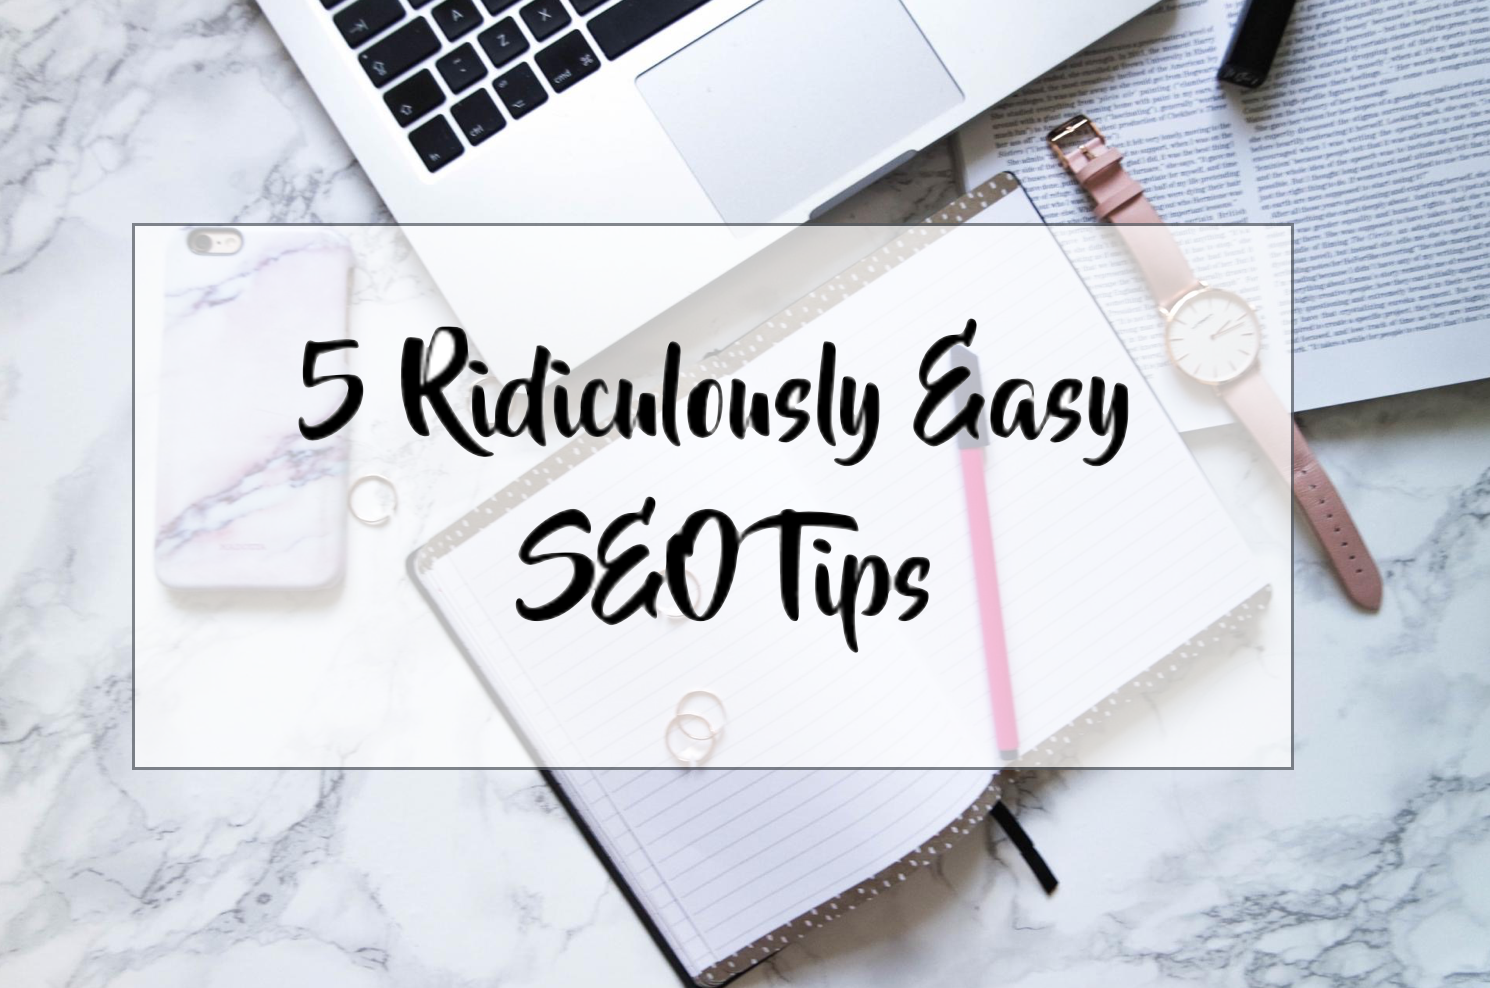 5 Ridiculously Easy SEO Tips